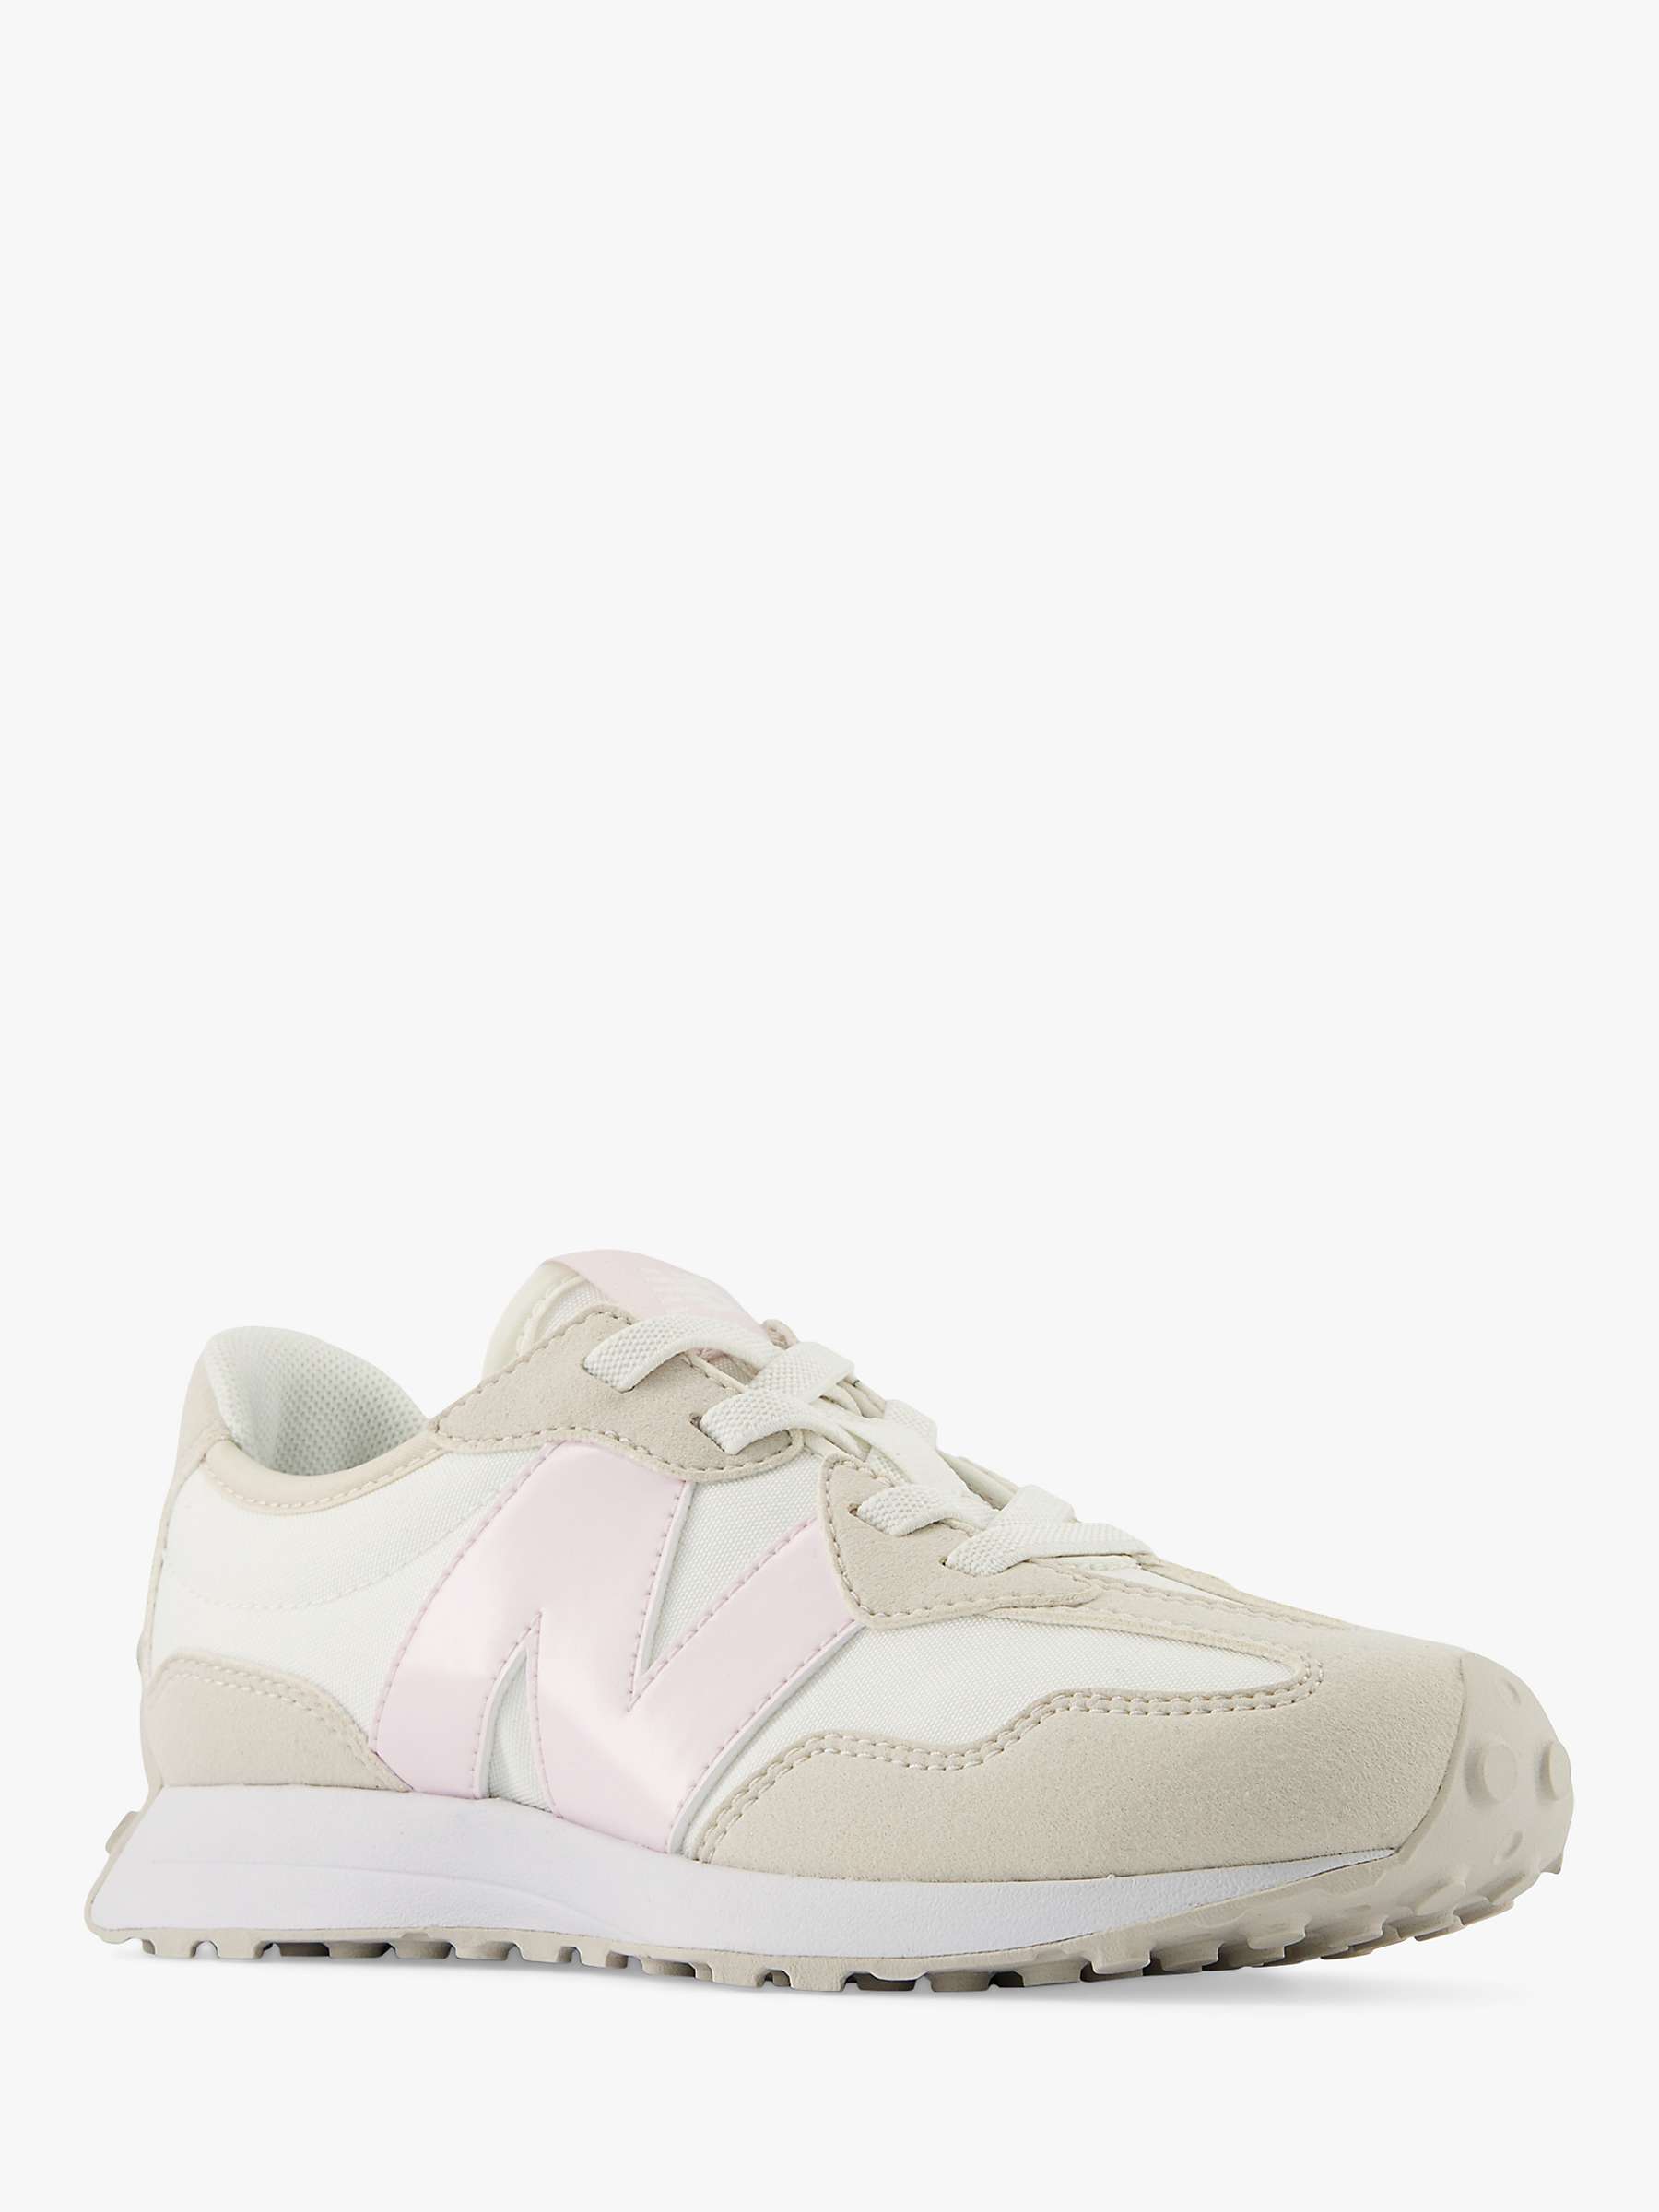 Buy New Balance Kids' 327 Bungee Lace Trainers, White/Multi Online at johnlewis.com